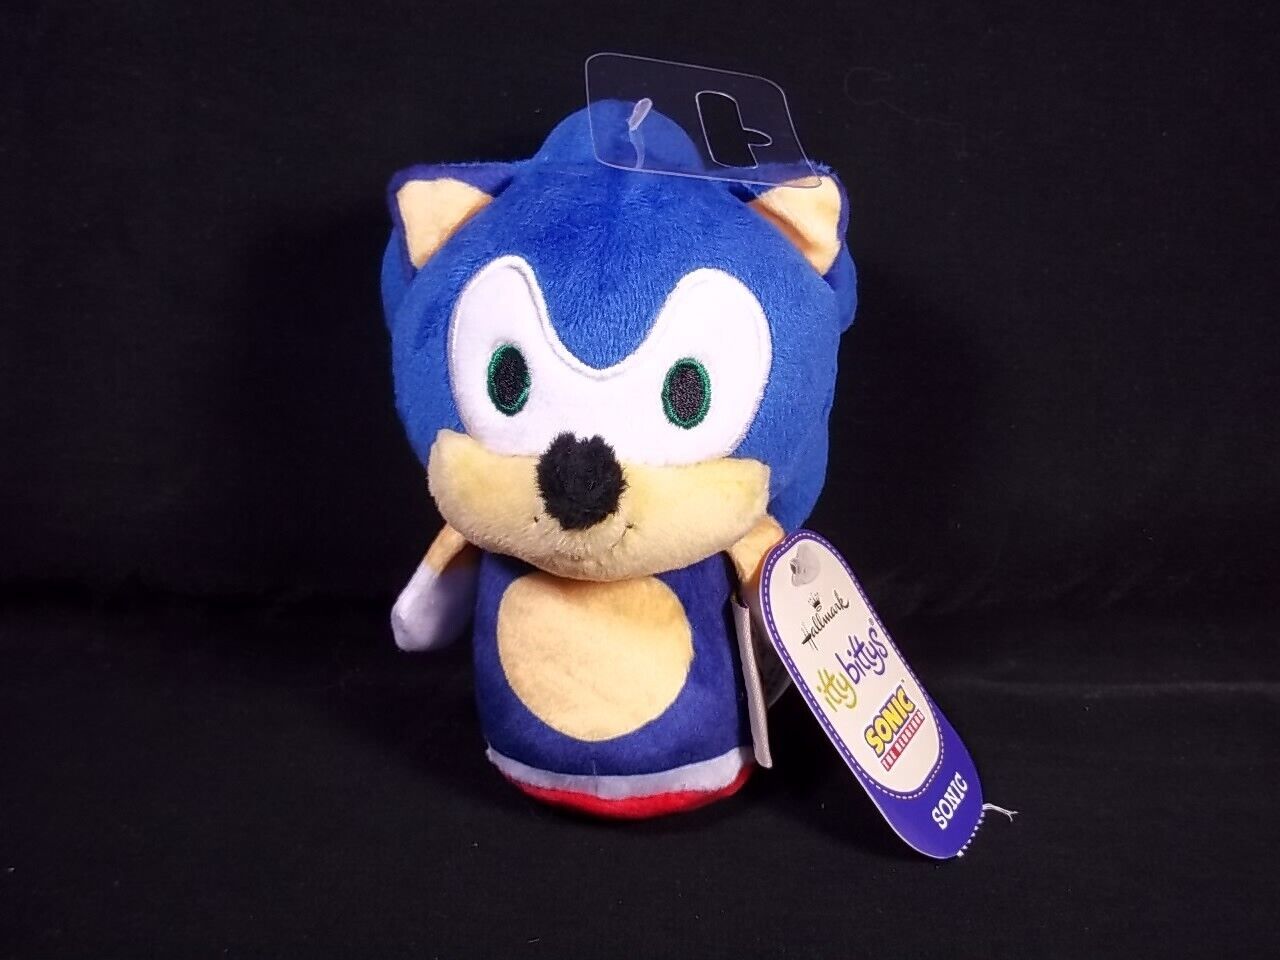 Primary image for Hallmark plush Itty Bittys Sonic the Hedgehog 4" NEW